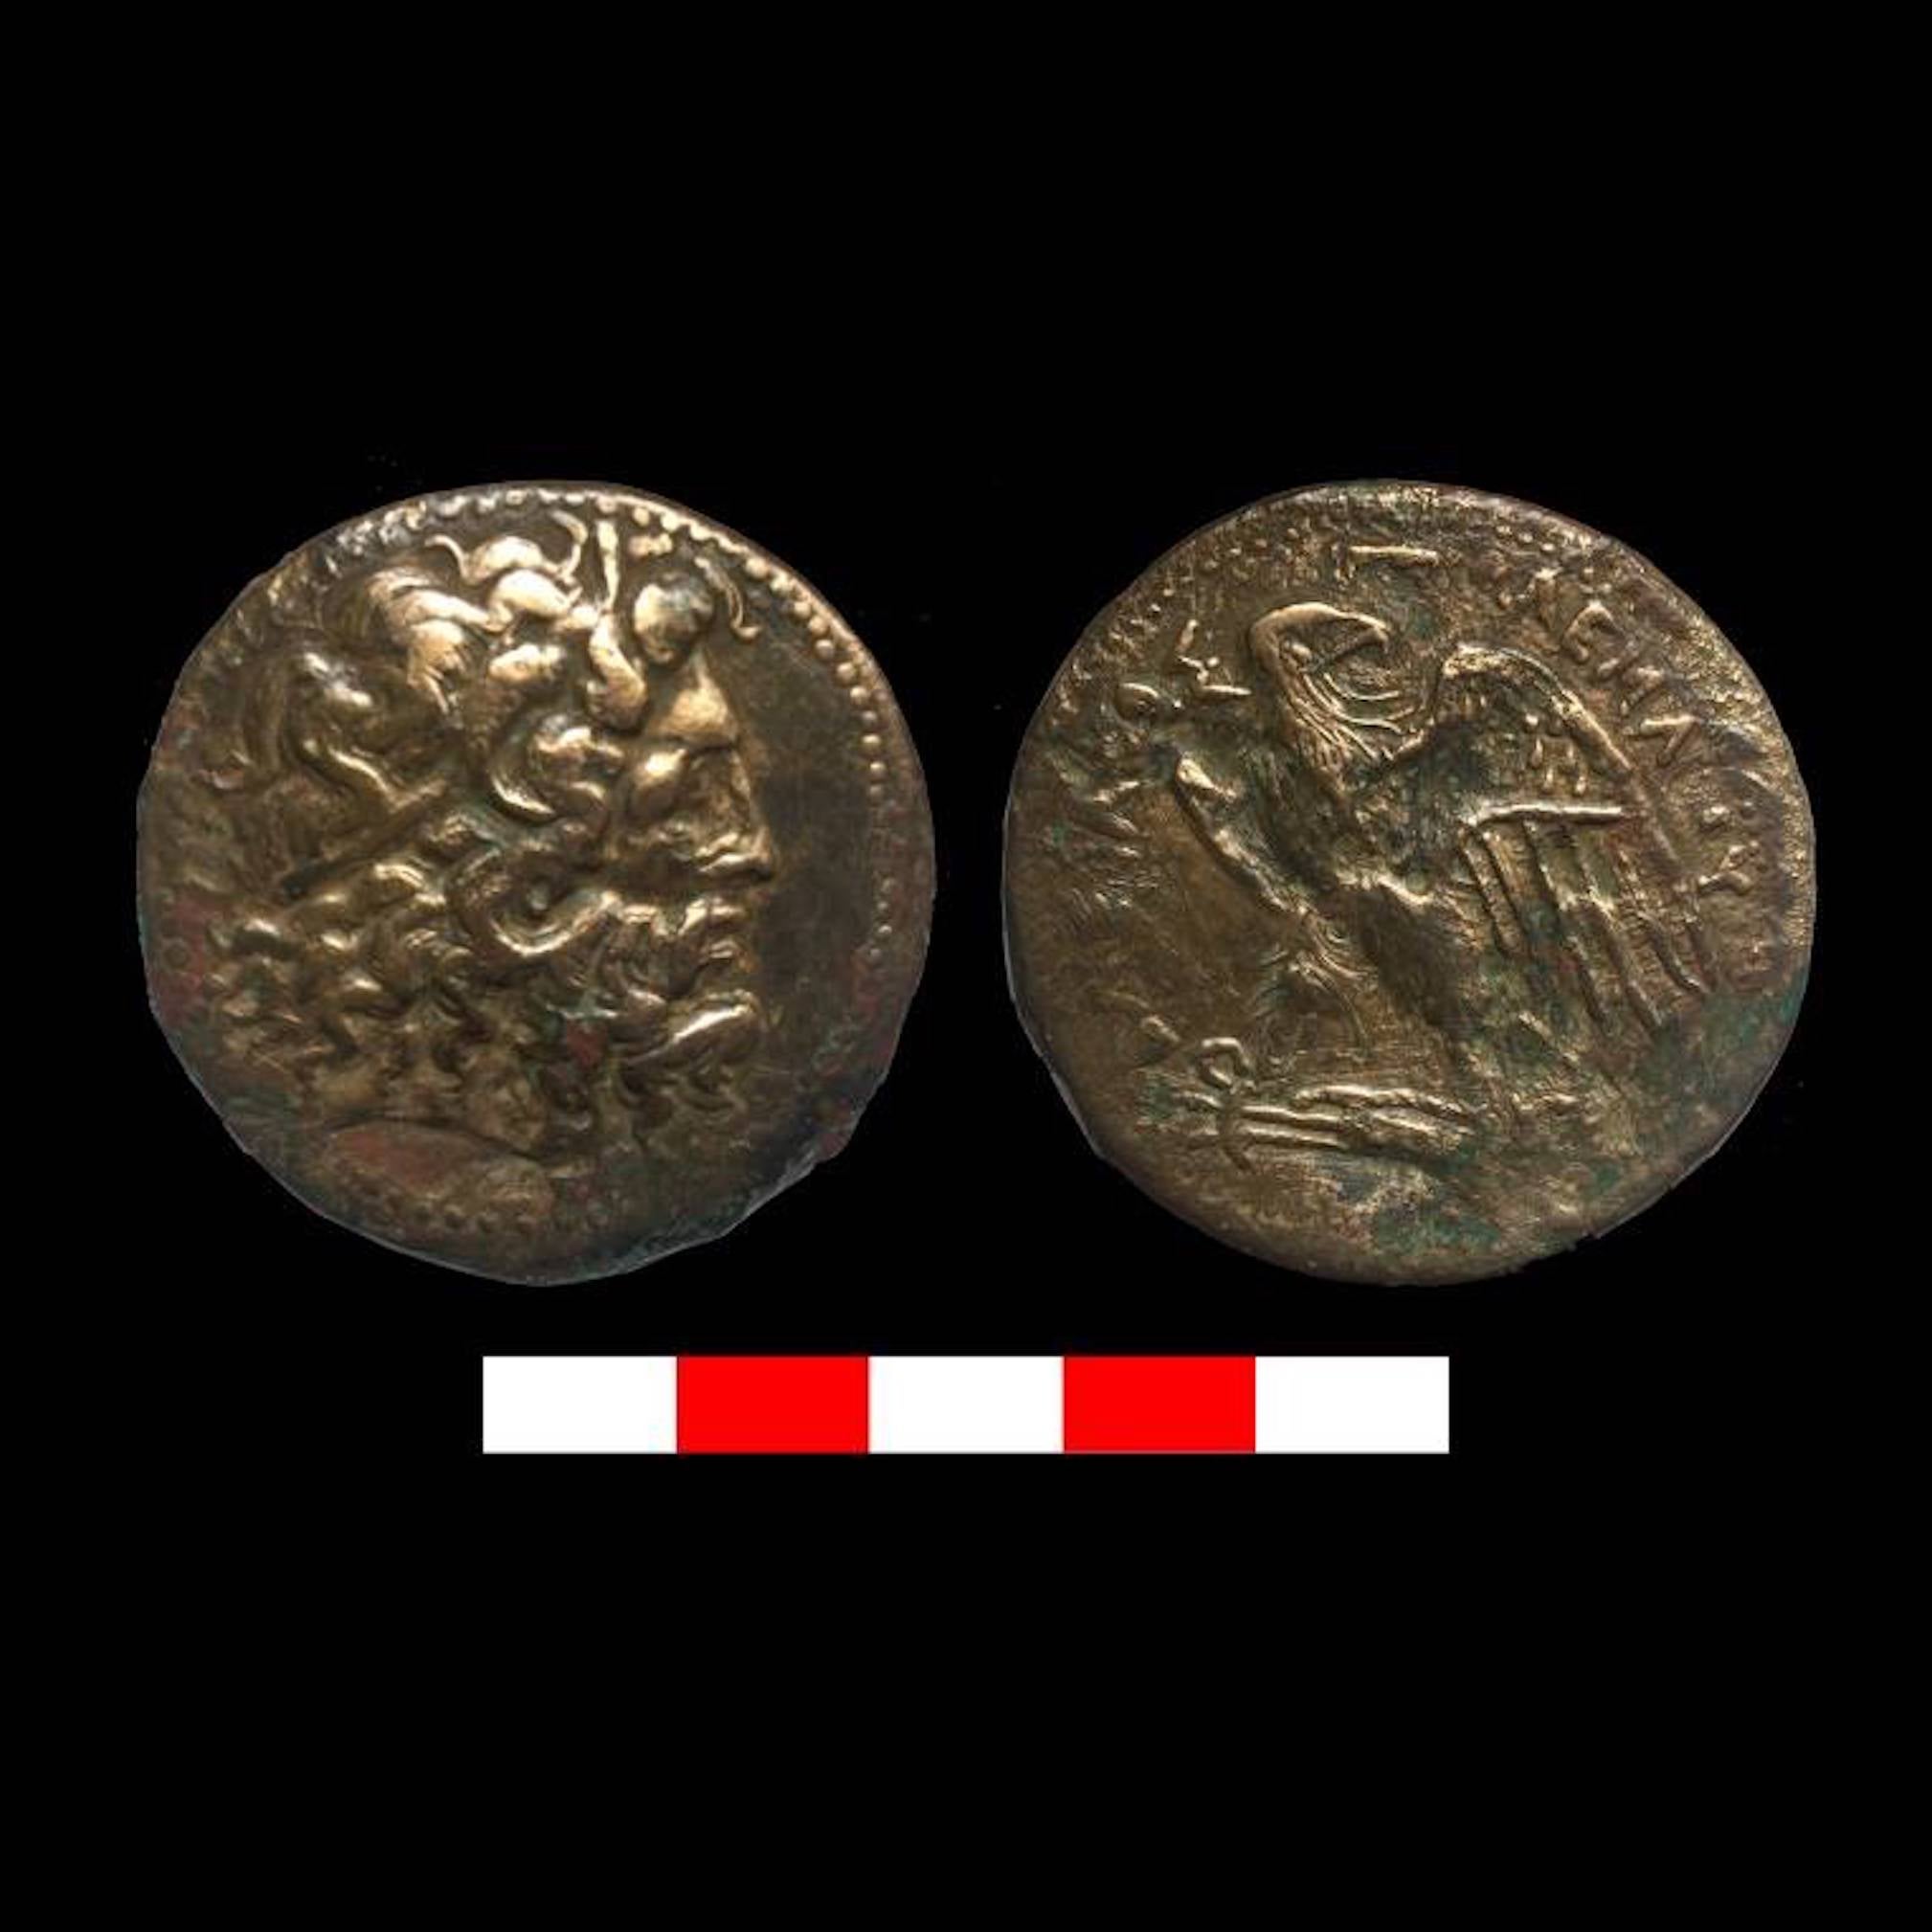 Ptolemaic era coins discovered in an ancient wine cellar north of Cairo